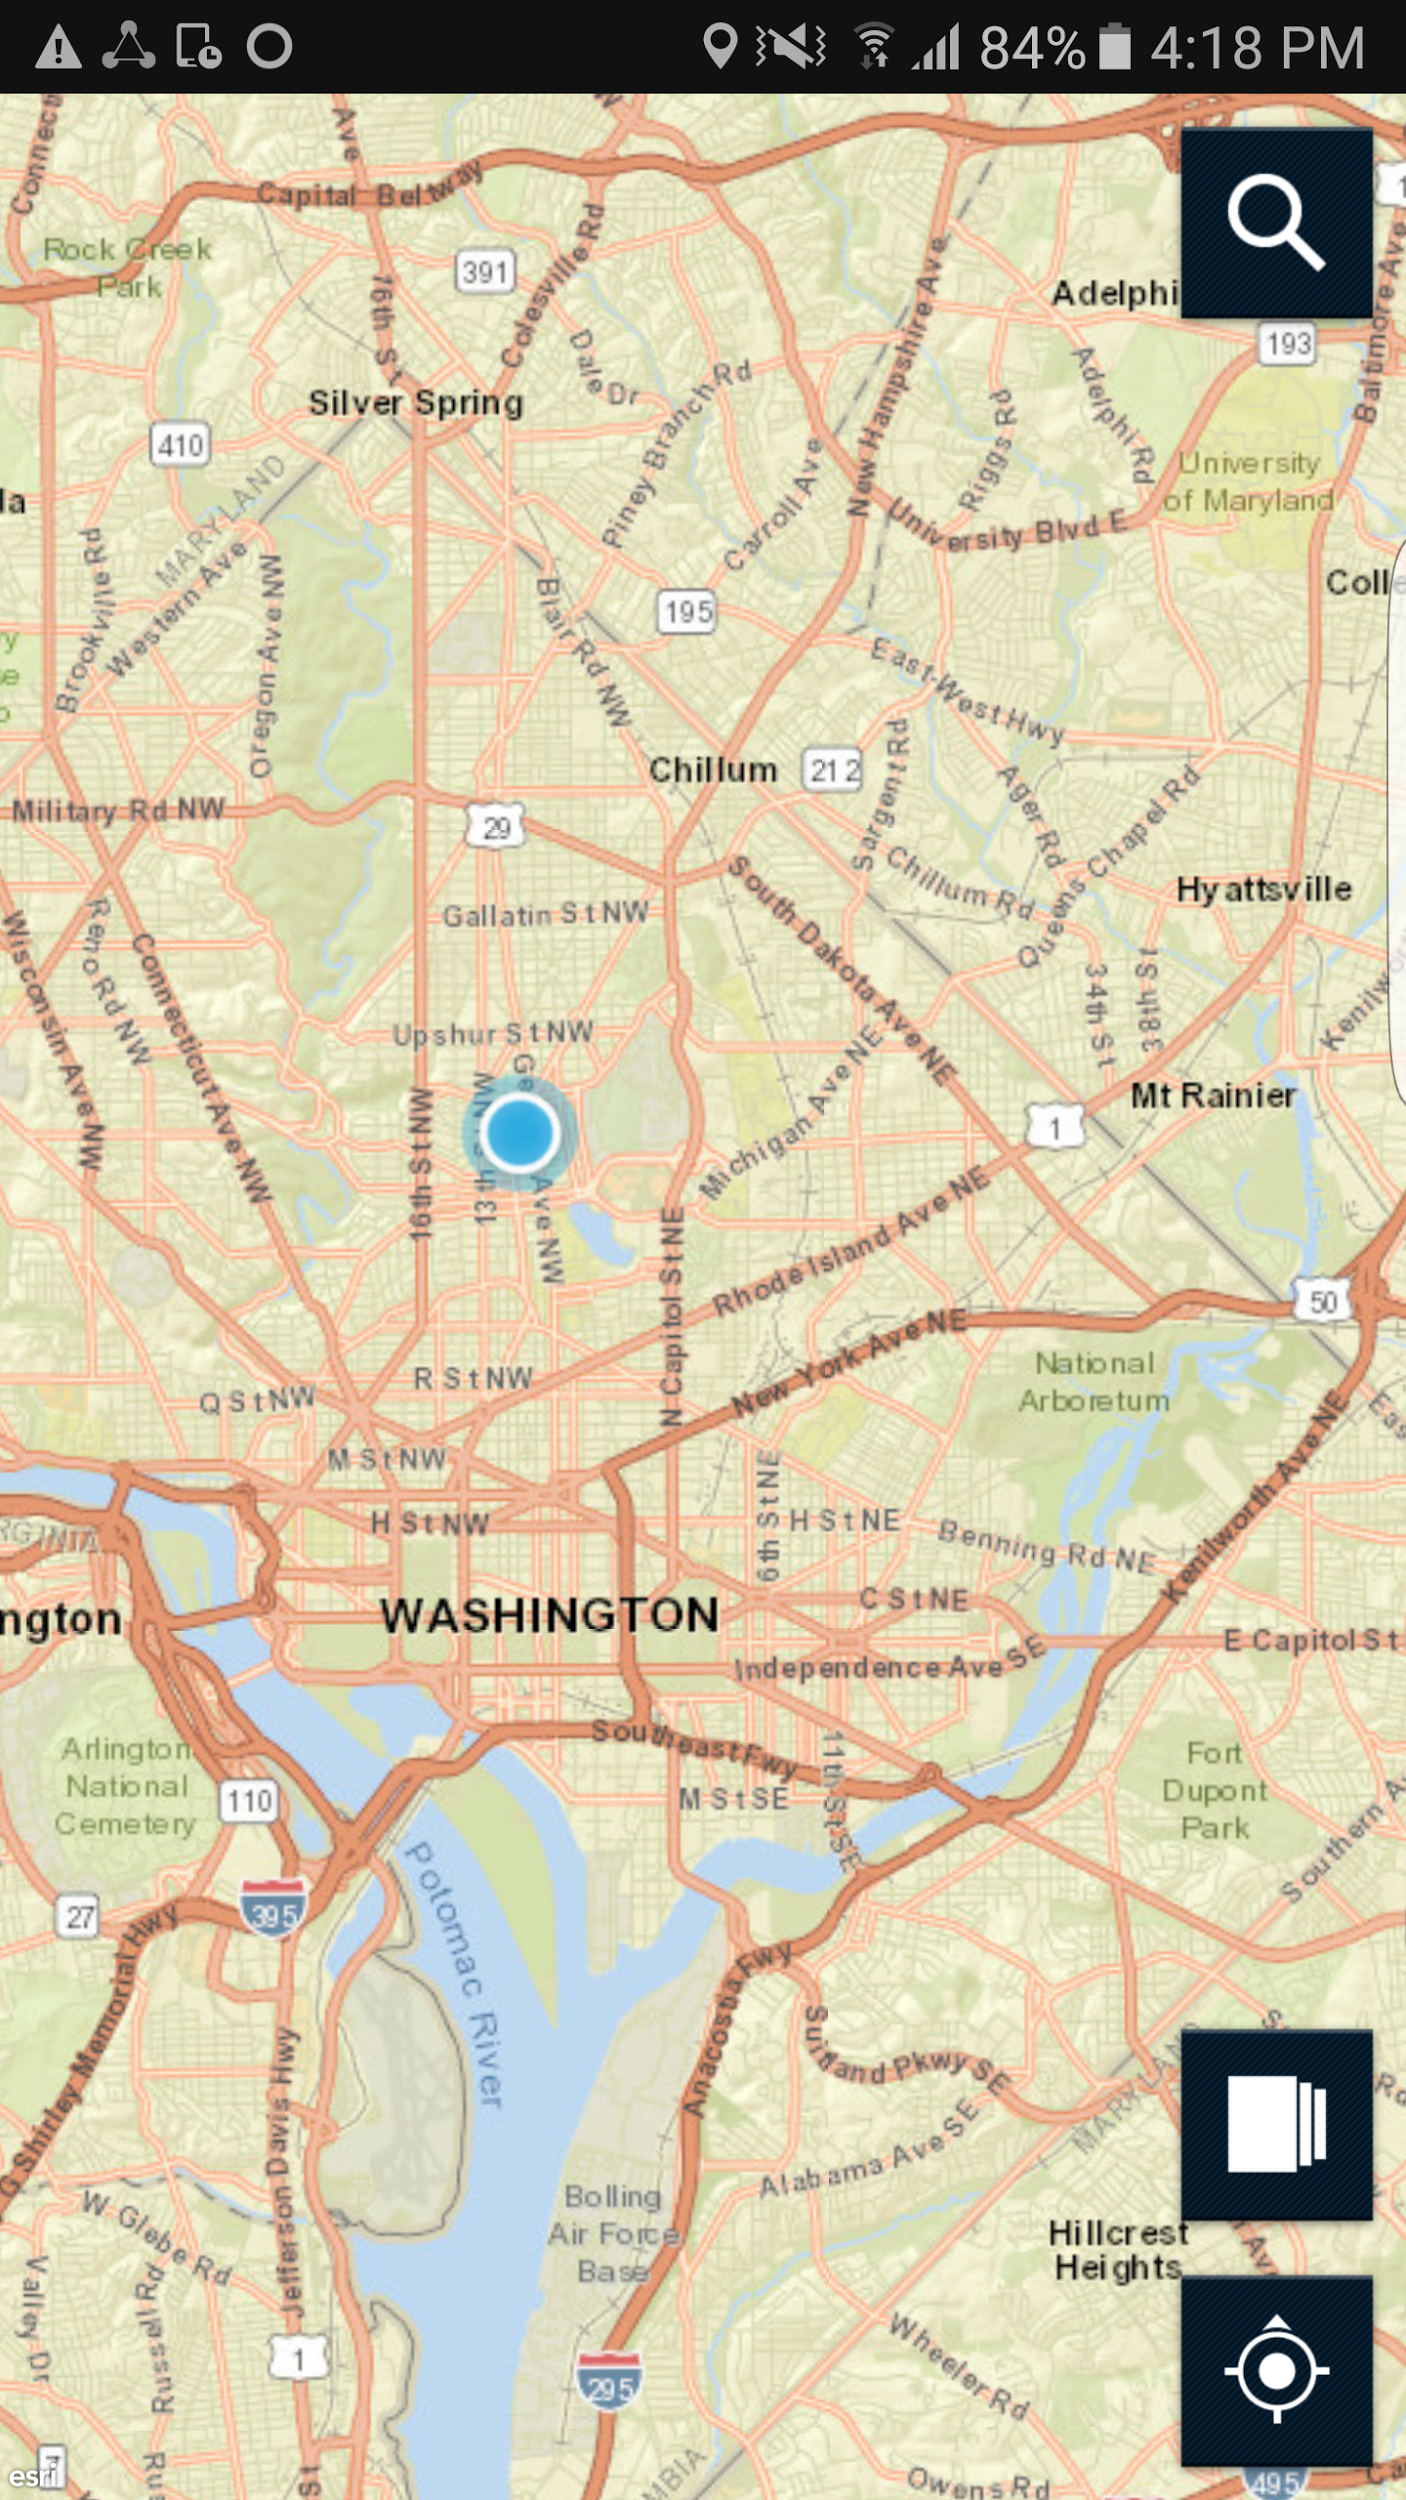 The left half of this figure shows a map of Washington, DC.